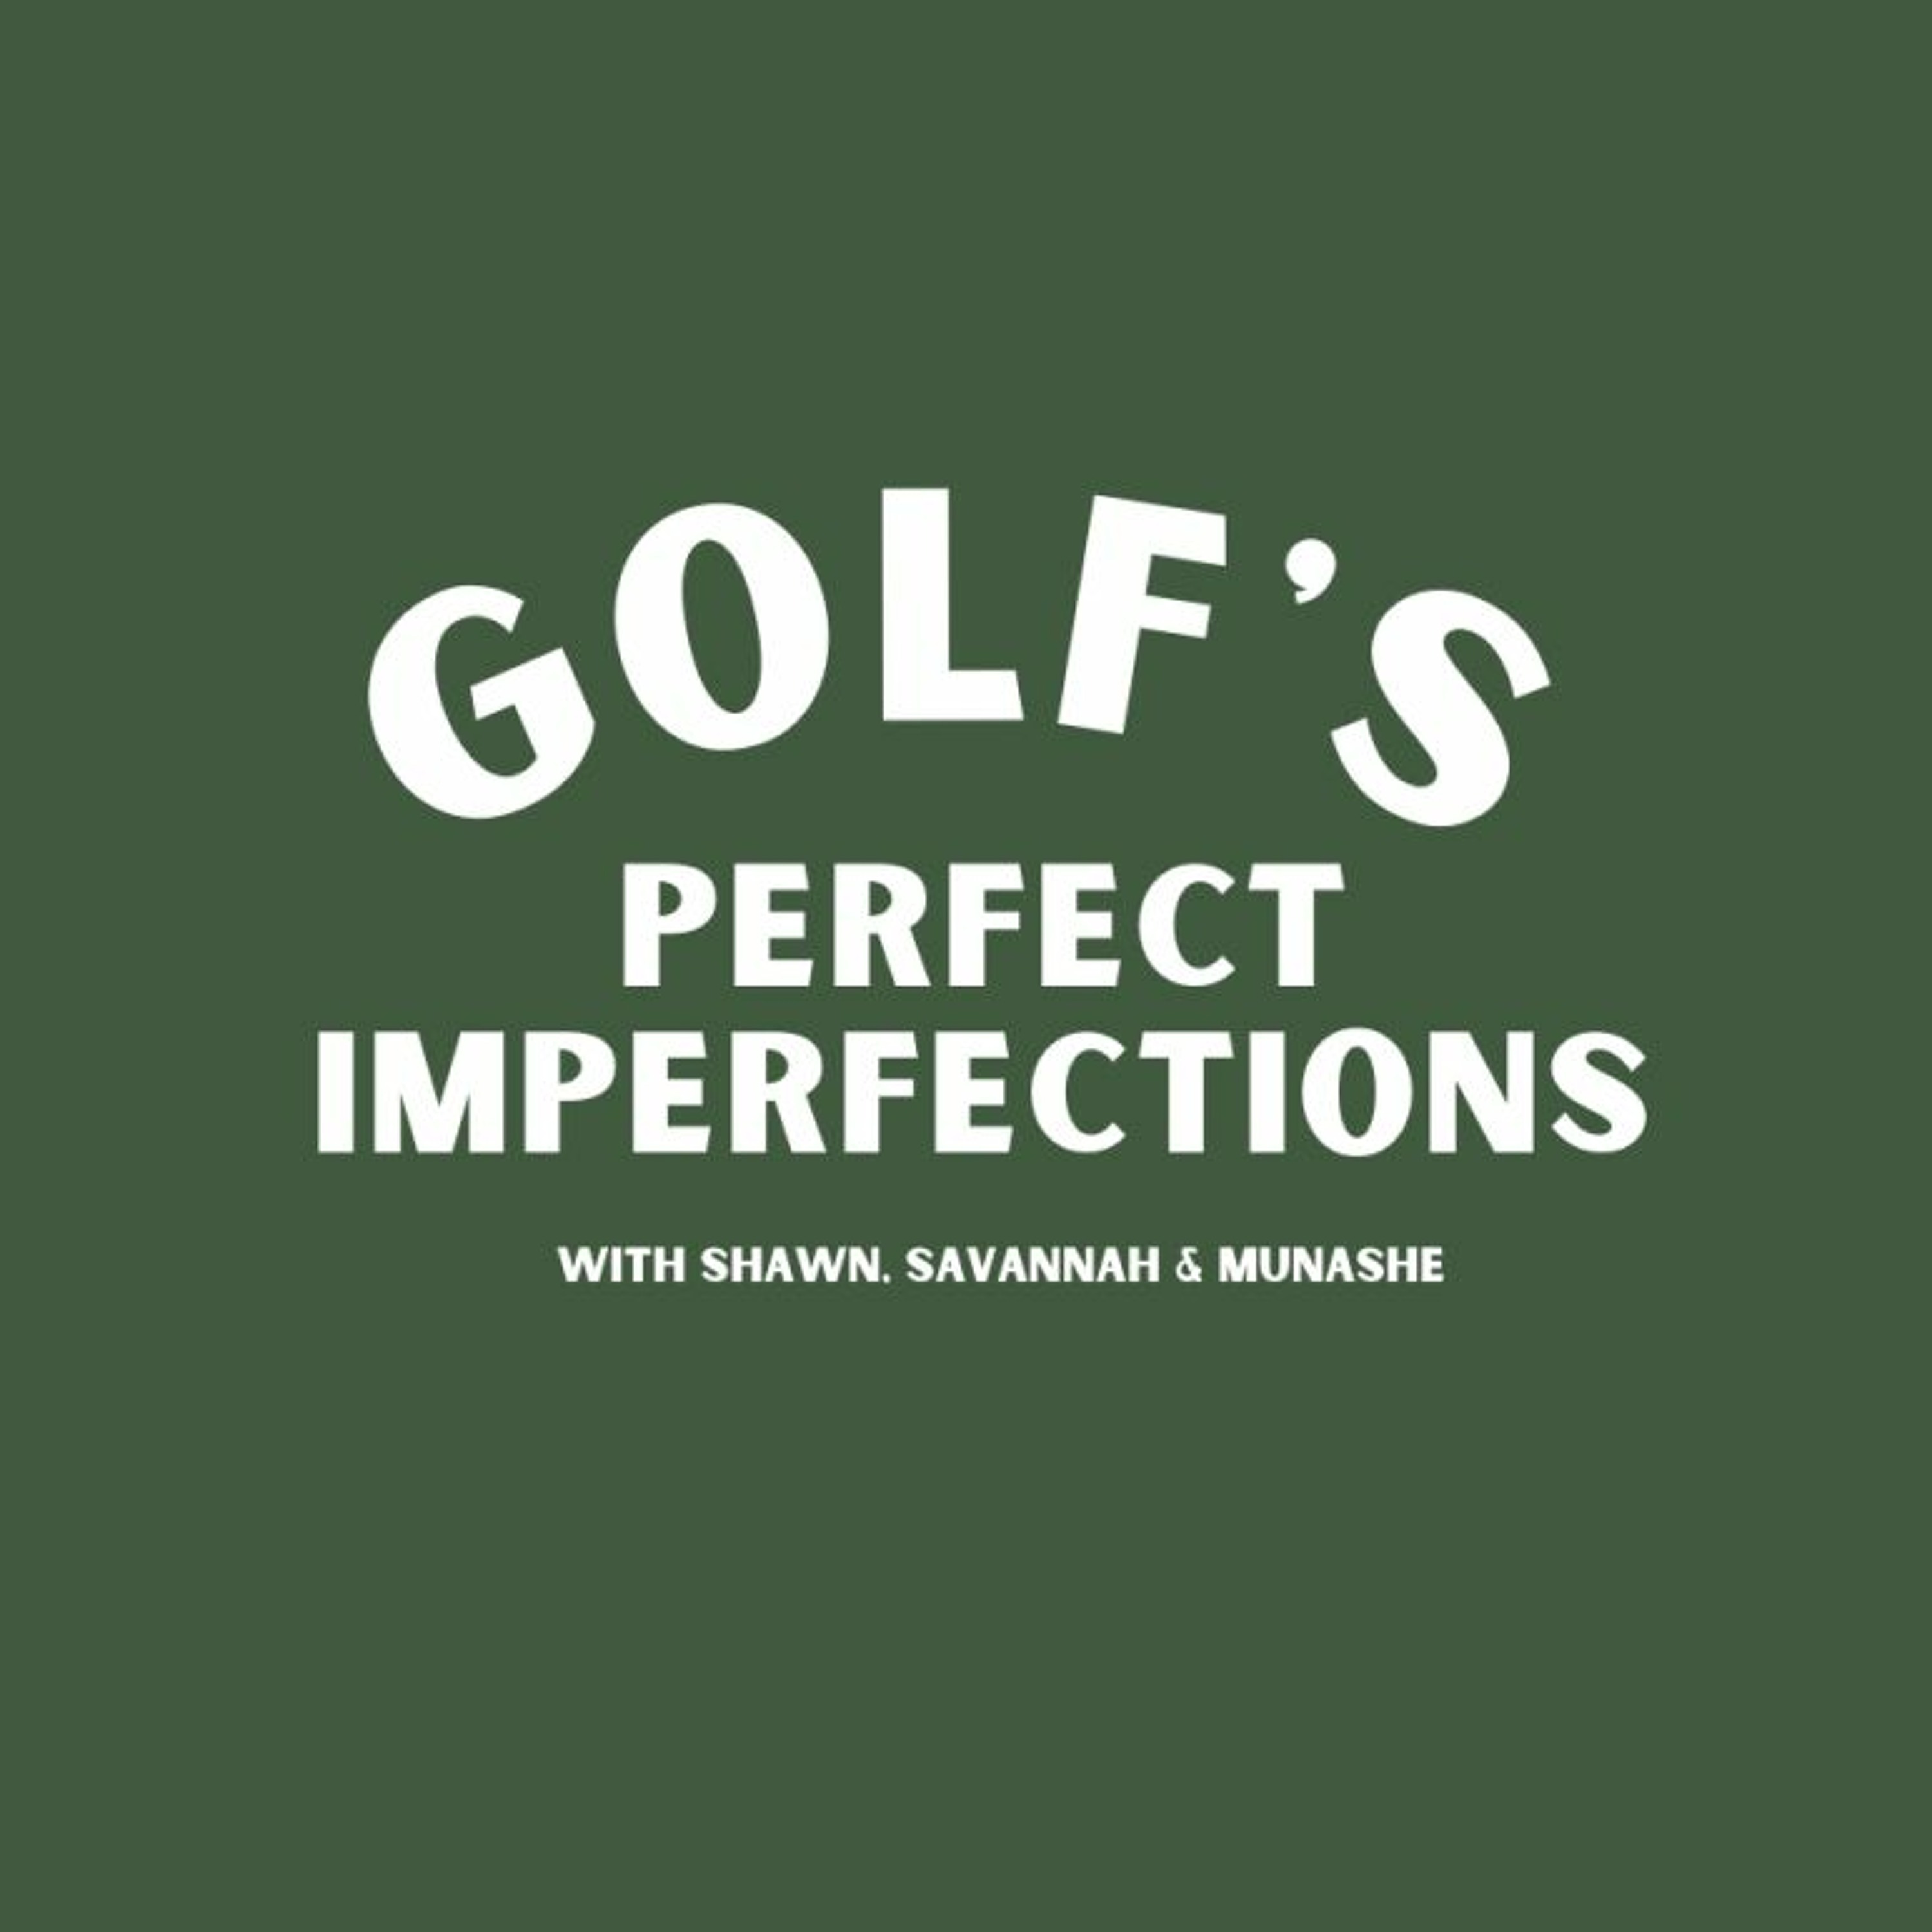 Golf's Perfect Imperfections: The Actual Learning Curve According to the Atomic Habits